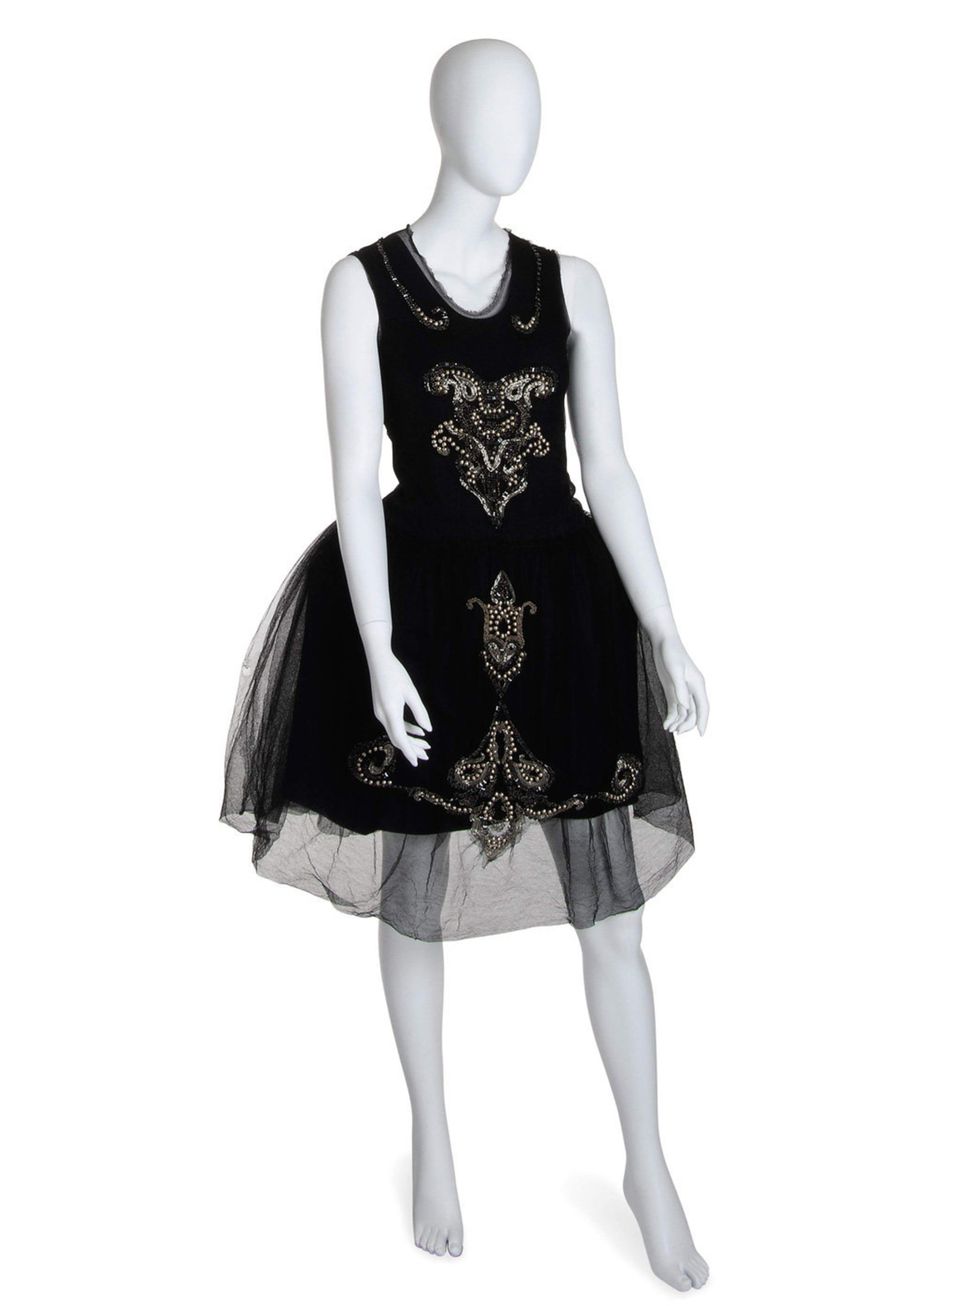 <p>A black tulle Lanvin dress in the Daphne Guinness auction</p>